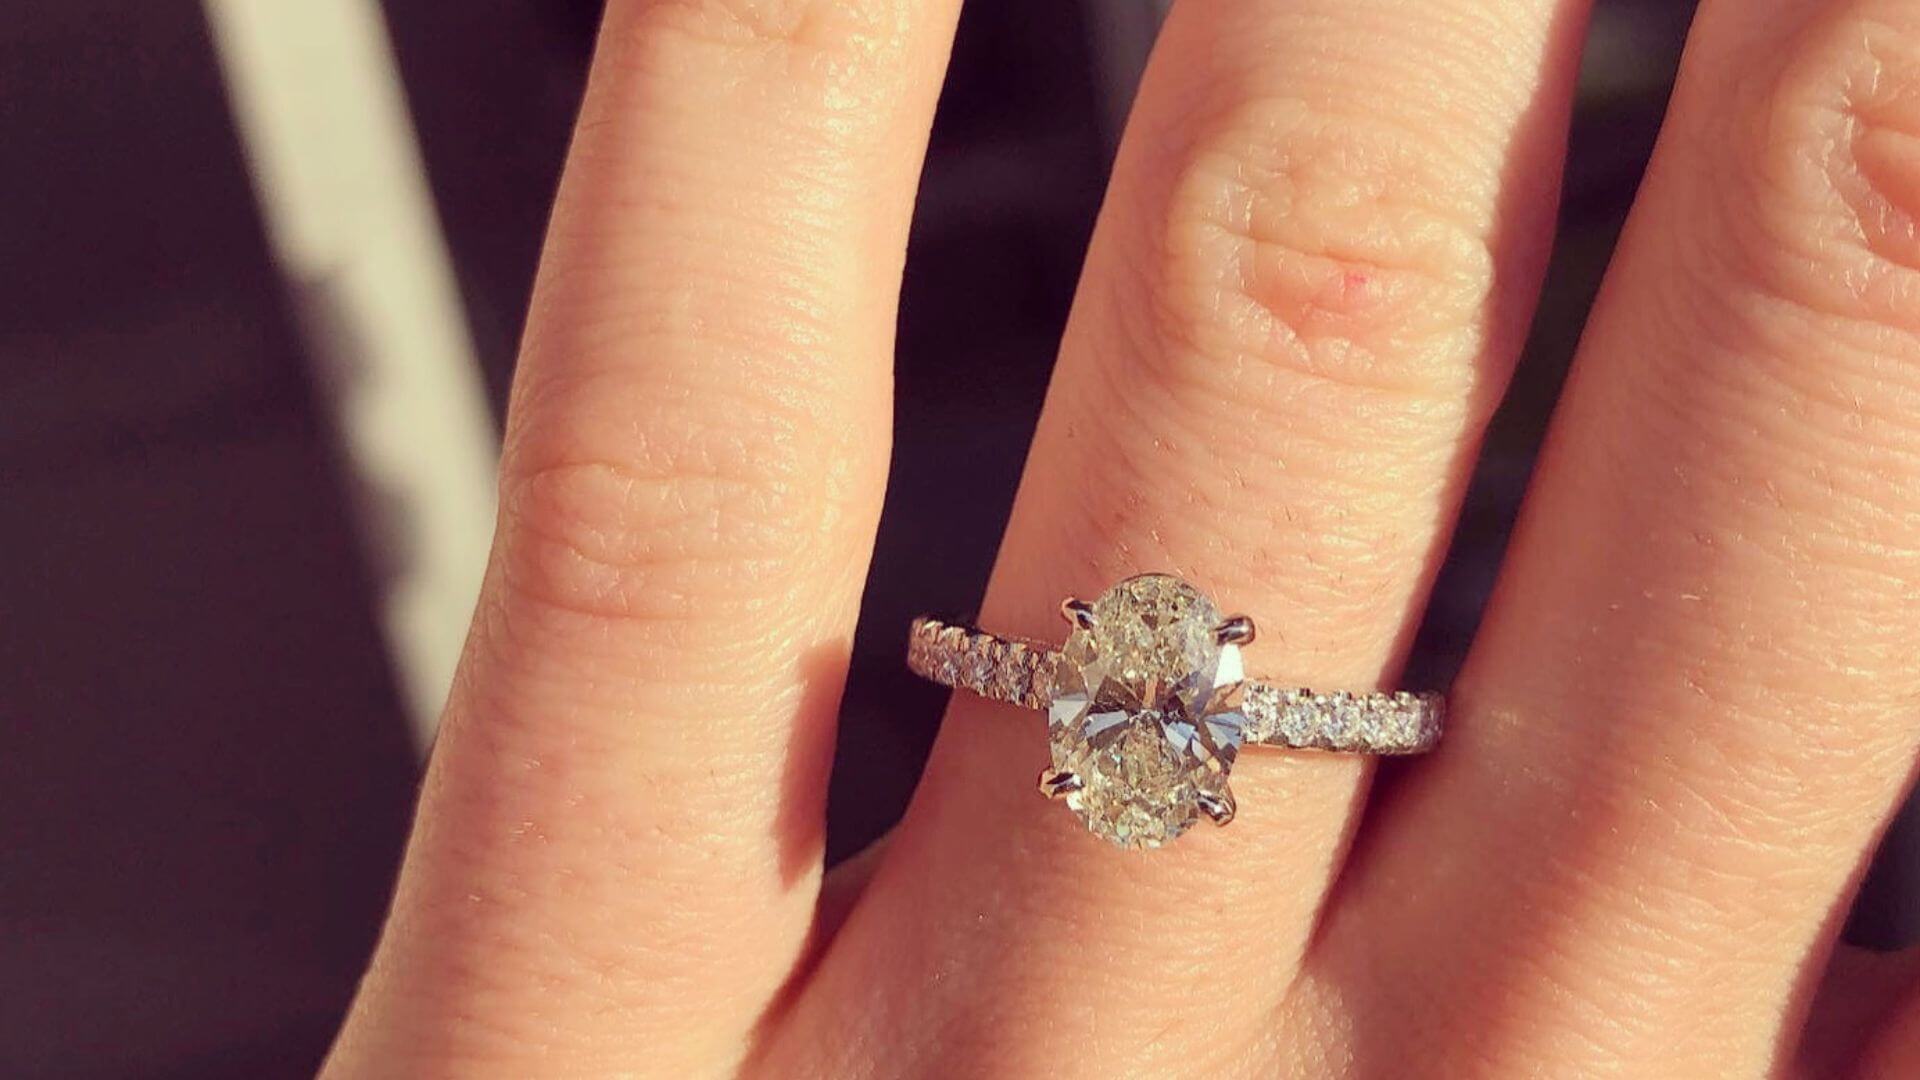 Things to Look for When Buying an Engagement Ring